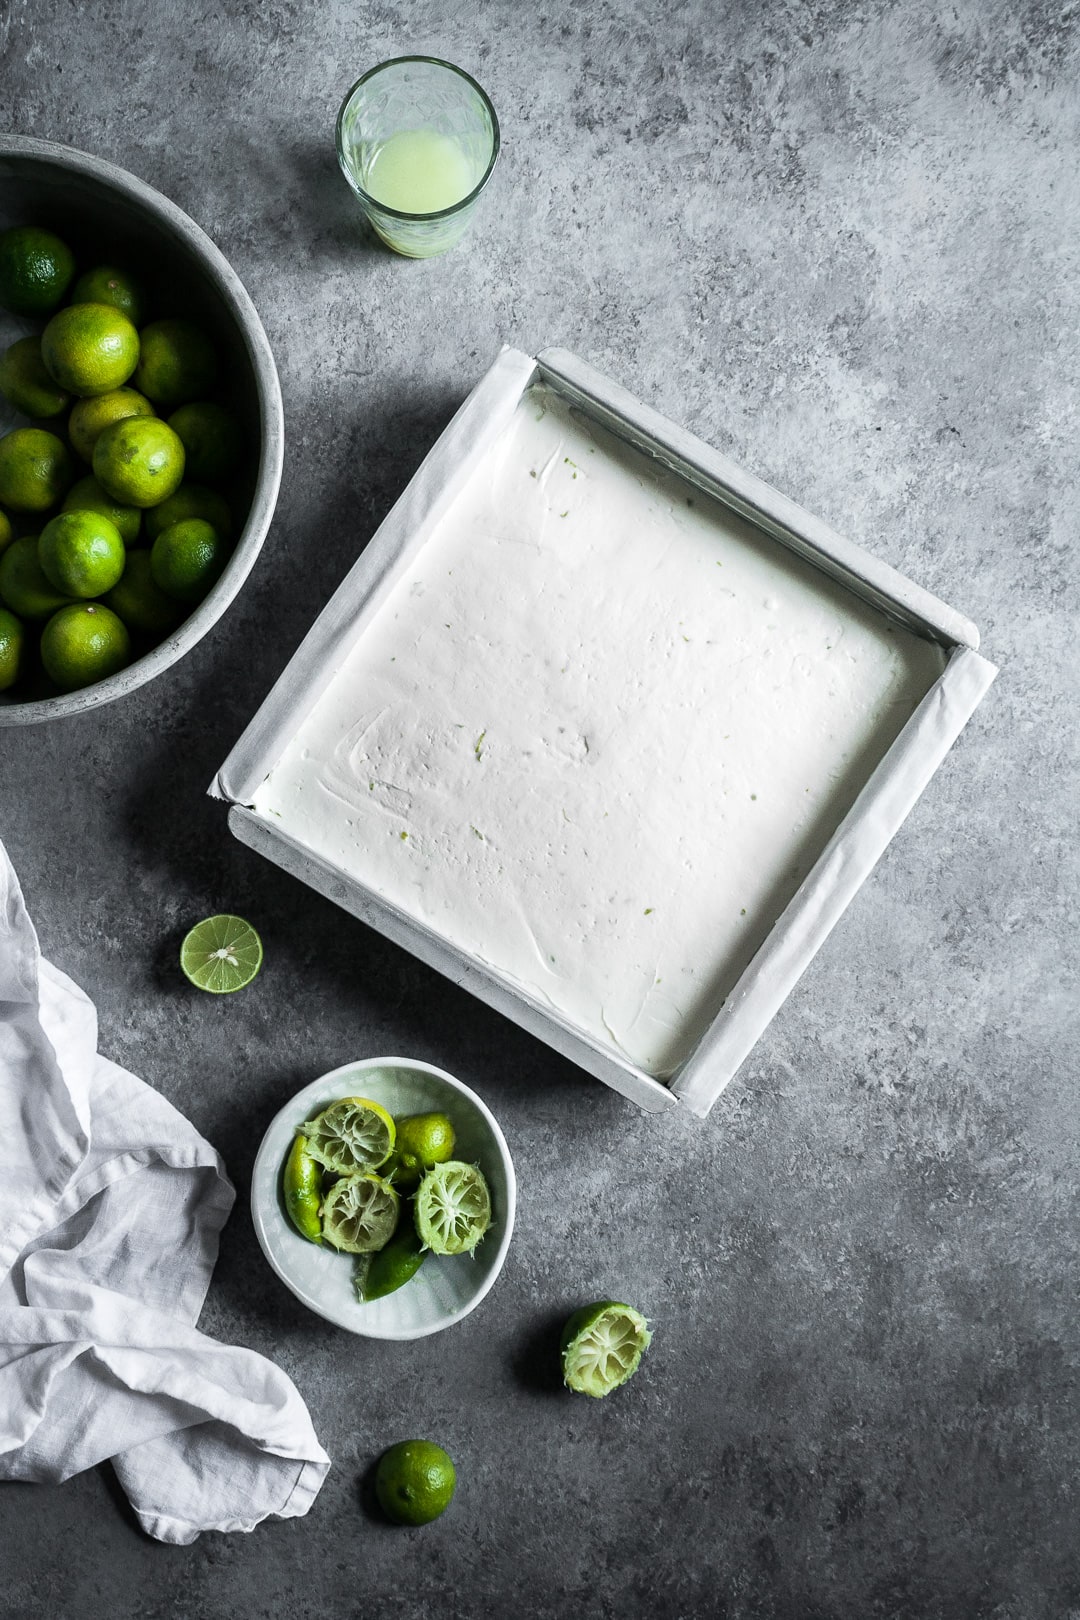 Pan of cheesecake bars on a grey background surrounded by key limes and a white linen napkin